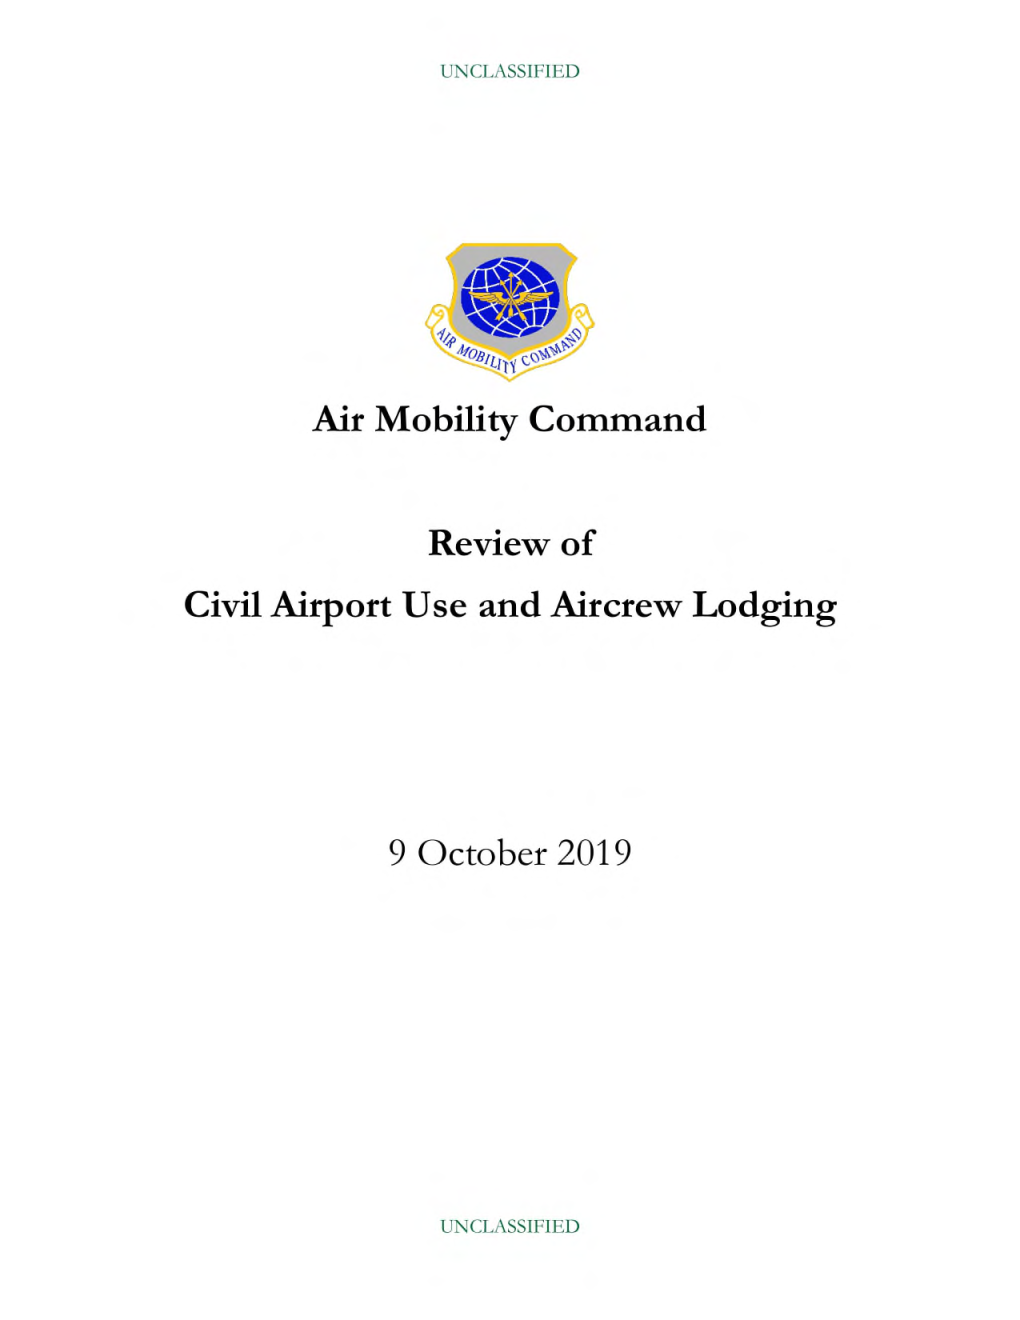 Air Mobility Command Review of Civil Airport Use and Aircrew Lodging.Pdf